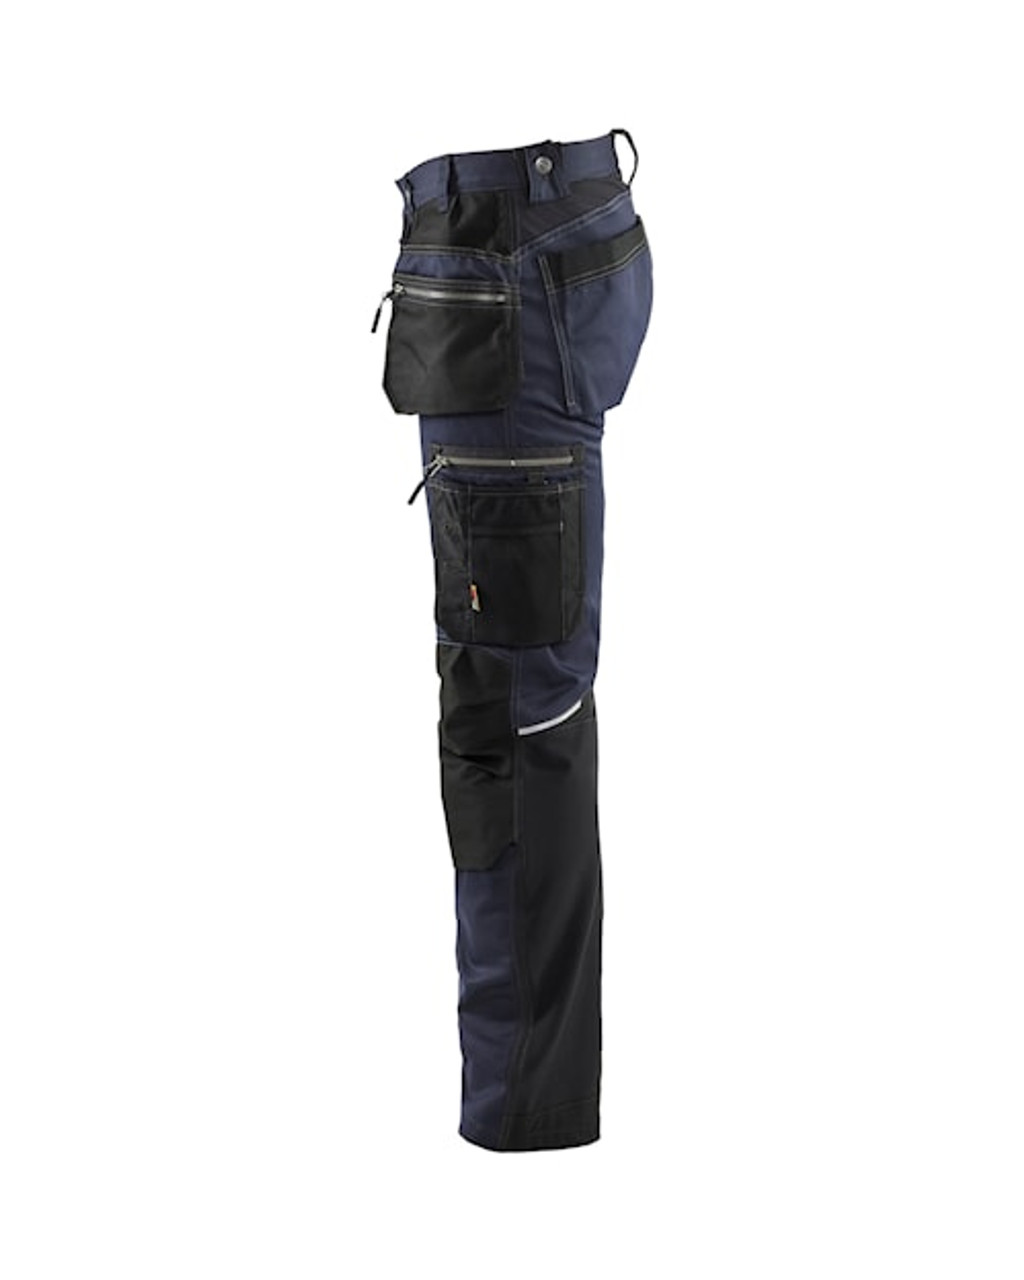 BLAKLADER Trousers | 1599  Trousers with Holster Pockets for Electricians, Plumbers in the Construction Jobs